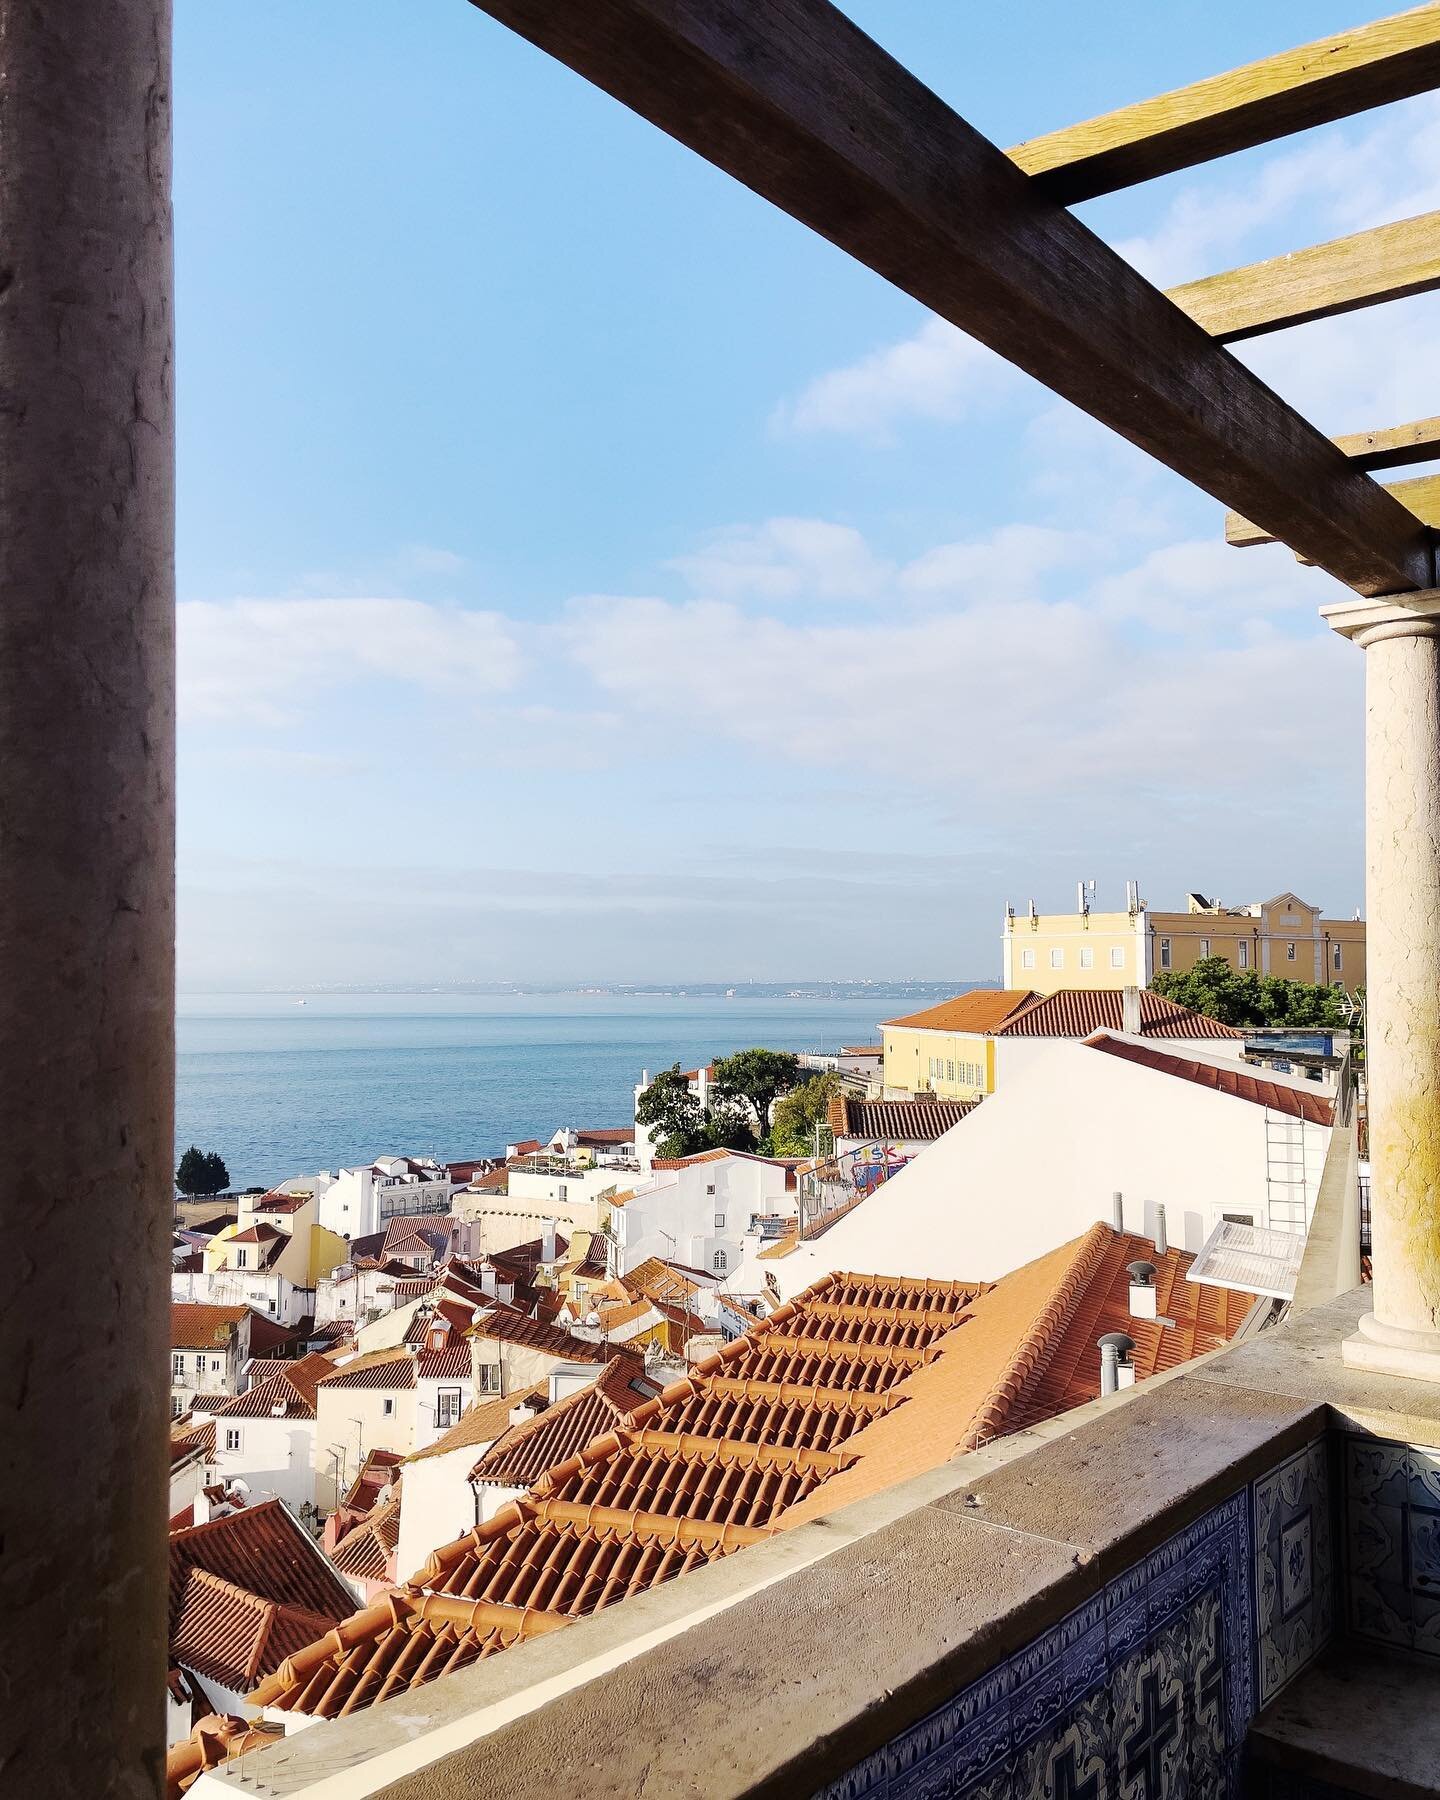 Just like Rome, Lisbon is a city built on seven hills which means you are almost certain to encounter a beautiful view everywhere you look. But the most breathtaking vistas are enjoyed from many miraduoros or scenic viewpoints dotted around the city.